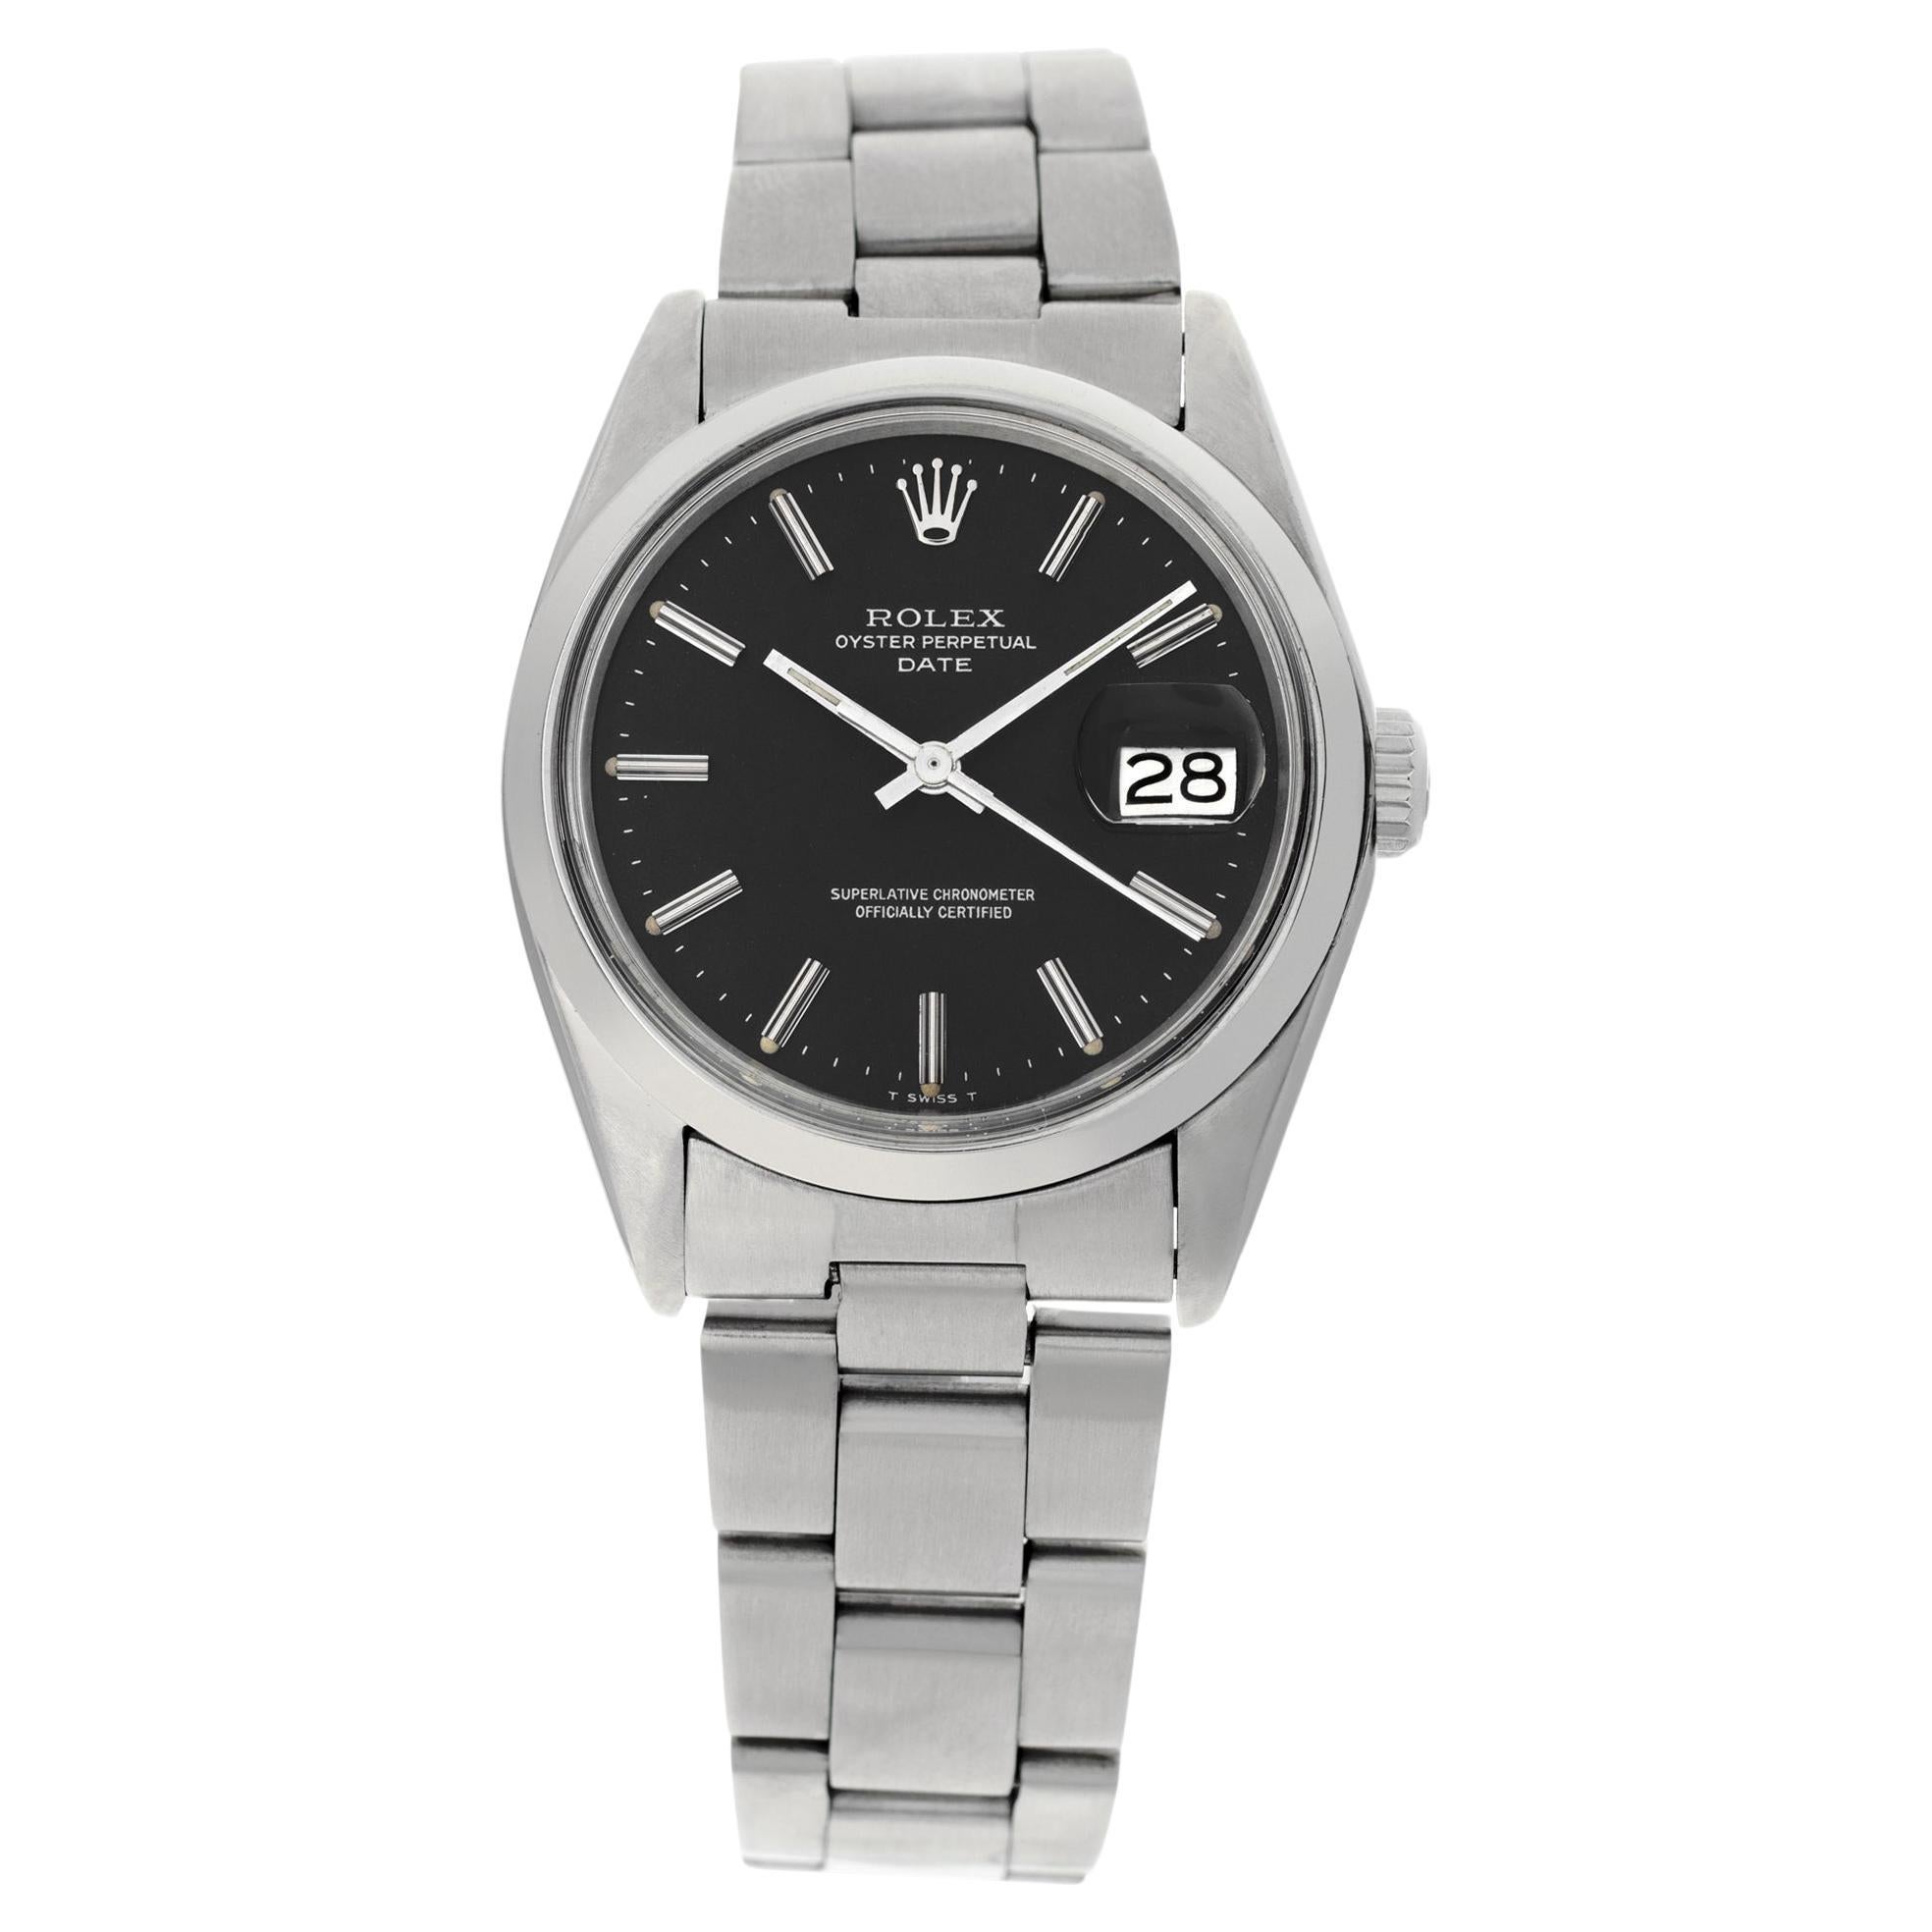 Rolex Date 1500 in Stainless Steel with a Black dial 34mm Automatic watch